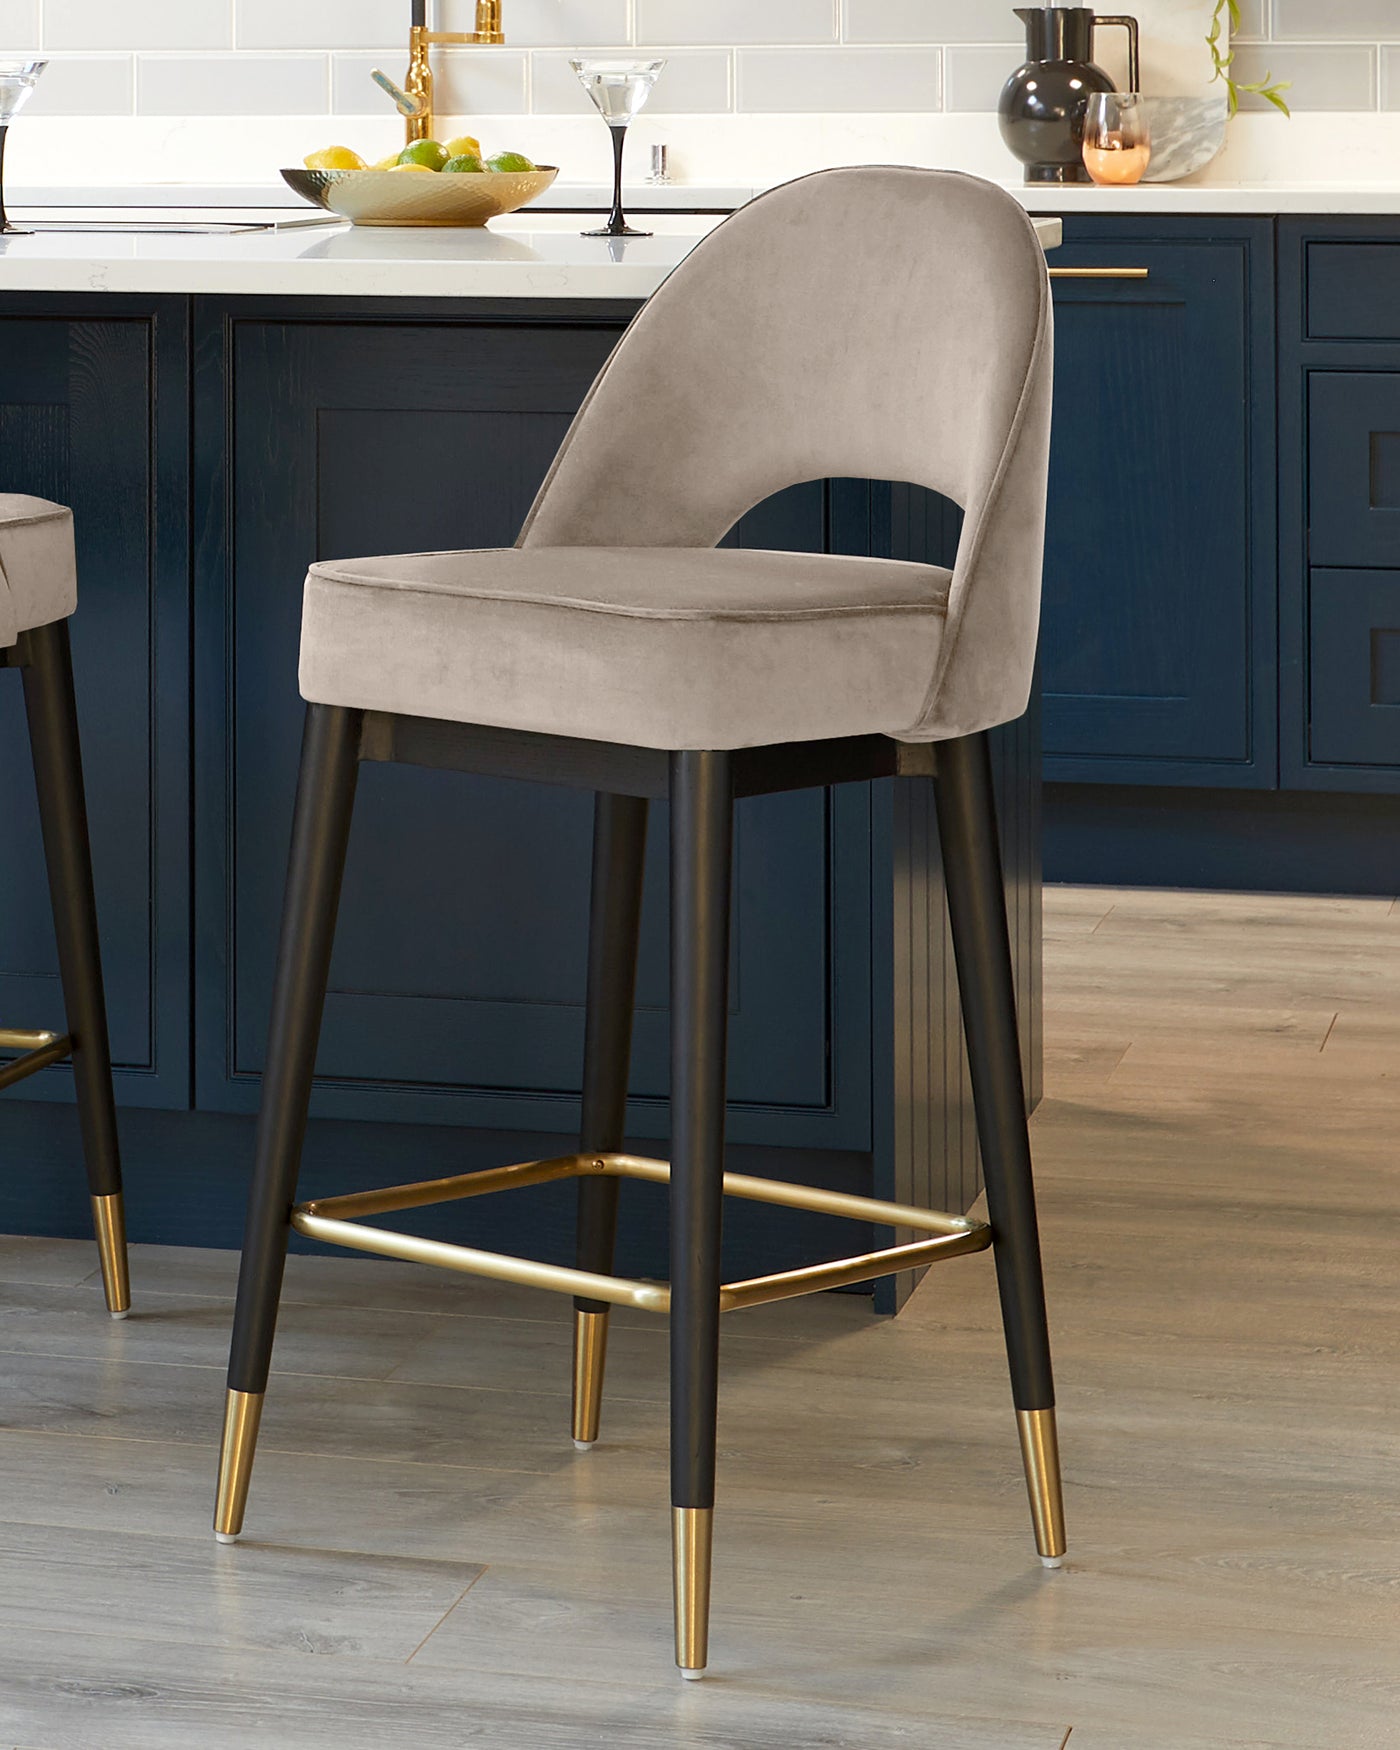 Elegant modern bar stool with a plush, curved backrest and cushioned seat in a soft grey velvet upholstery. It features a sturdy frame with matte black legs accented by metallic gold tips and footrest for added style and support. The design complements a chic, contemporary kitchen interior with dark blue cabinetry and light wood flooring.